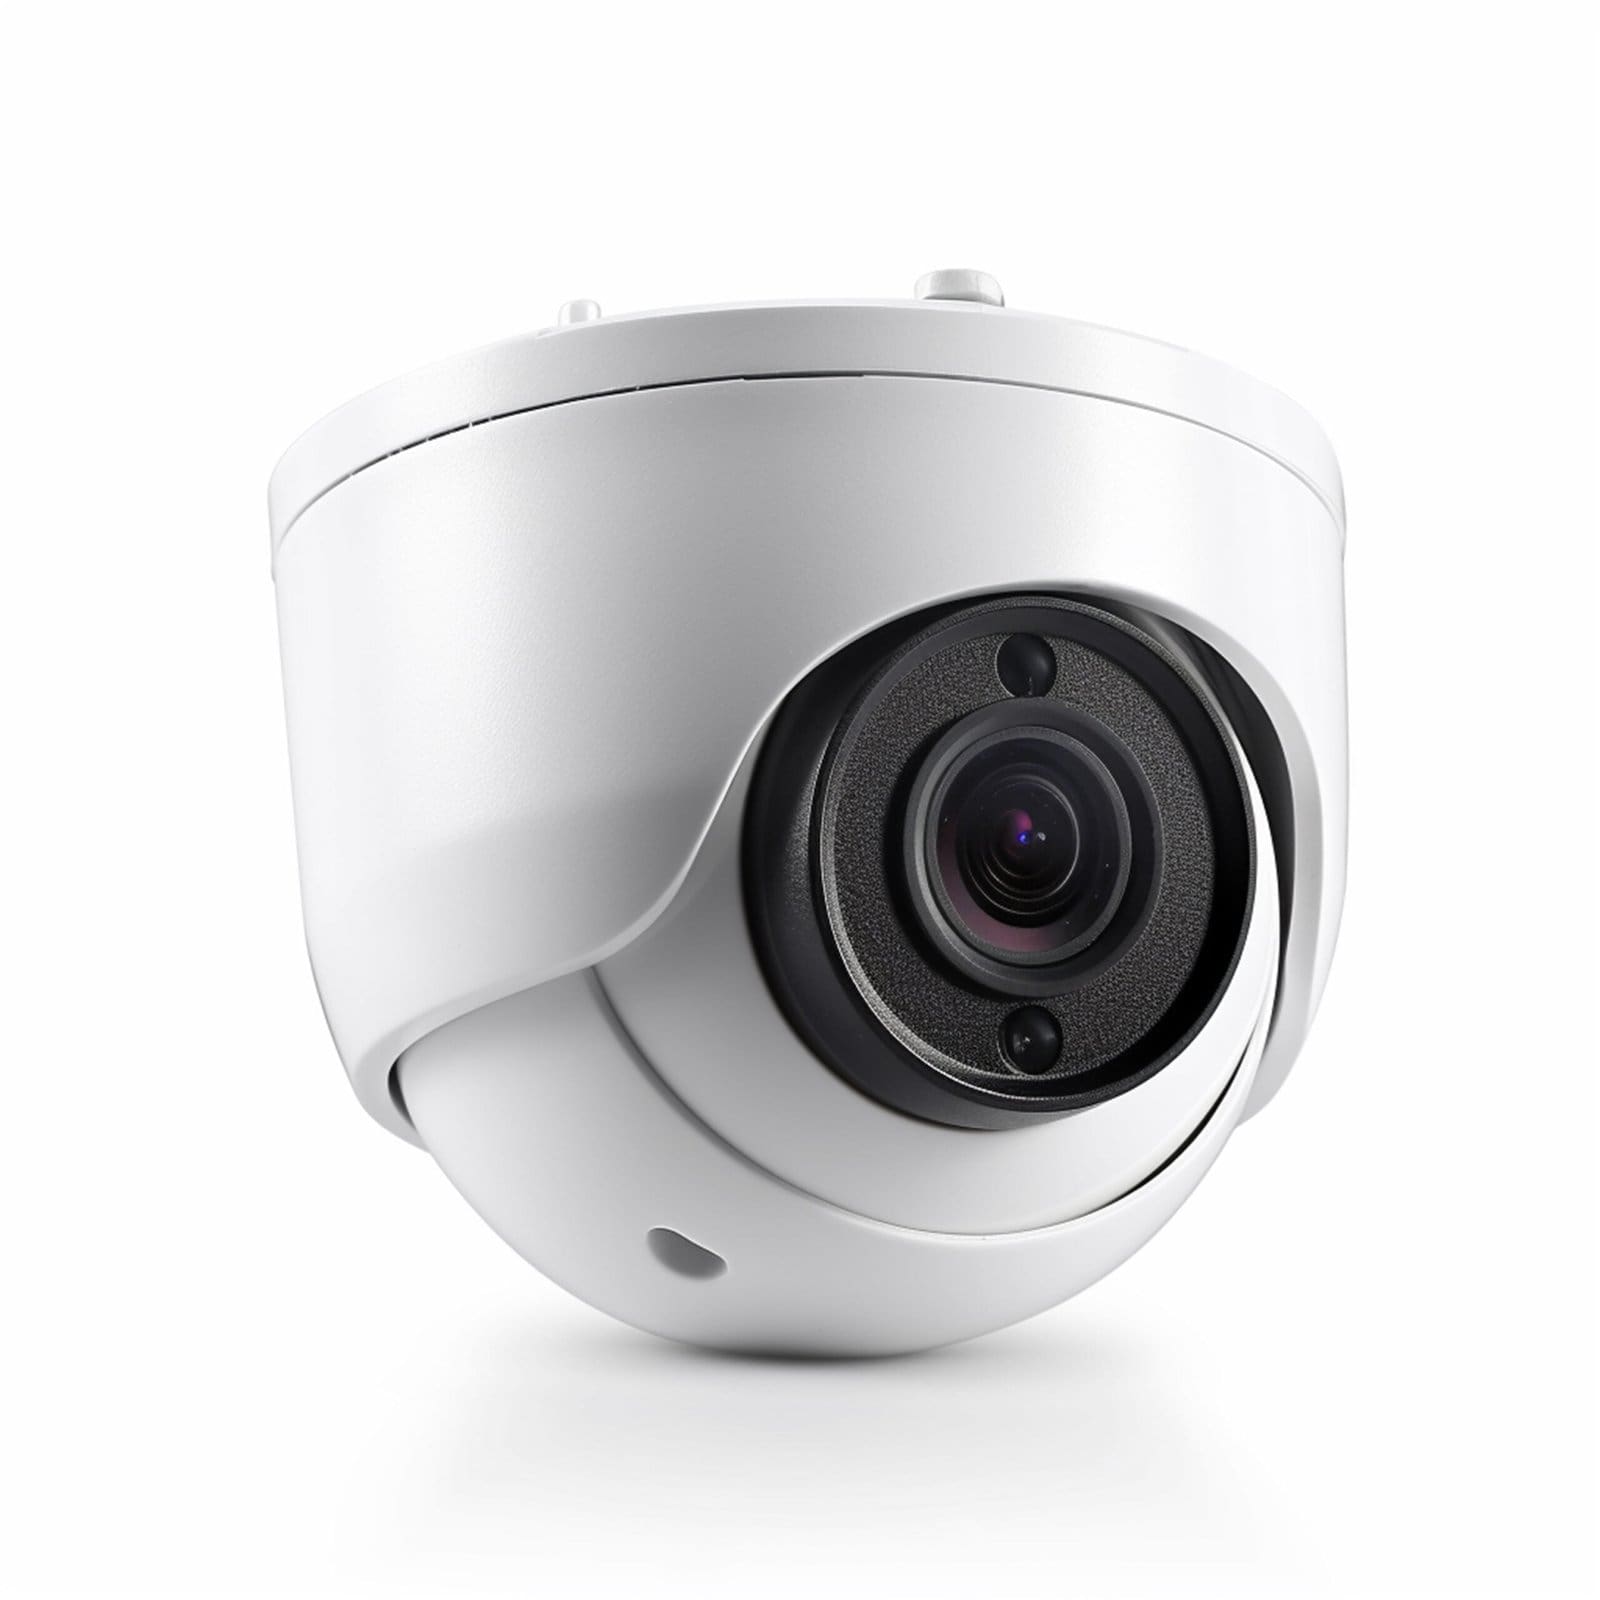 What Is The Primary Purpose Of Using Smart Cameras?